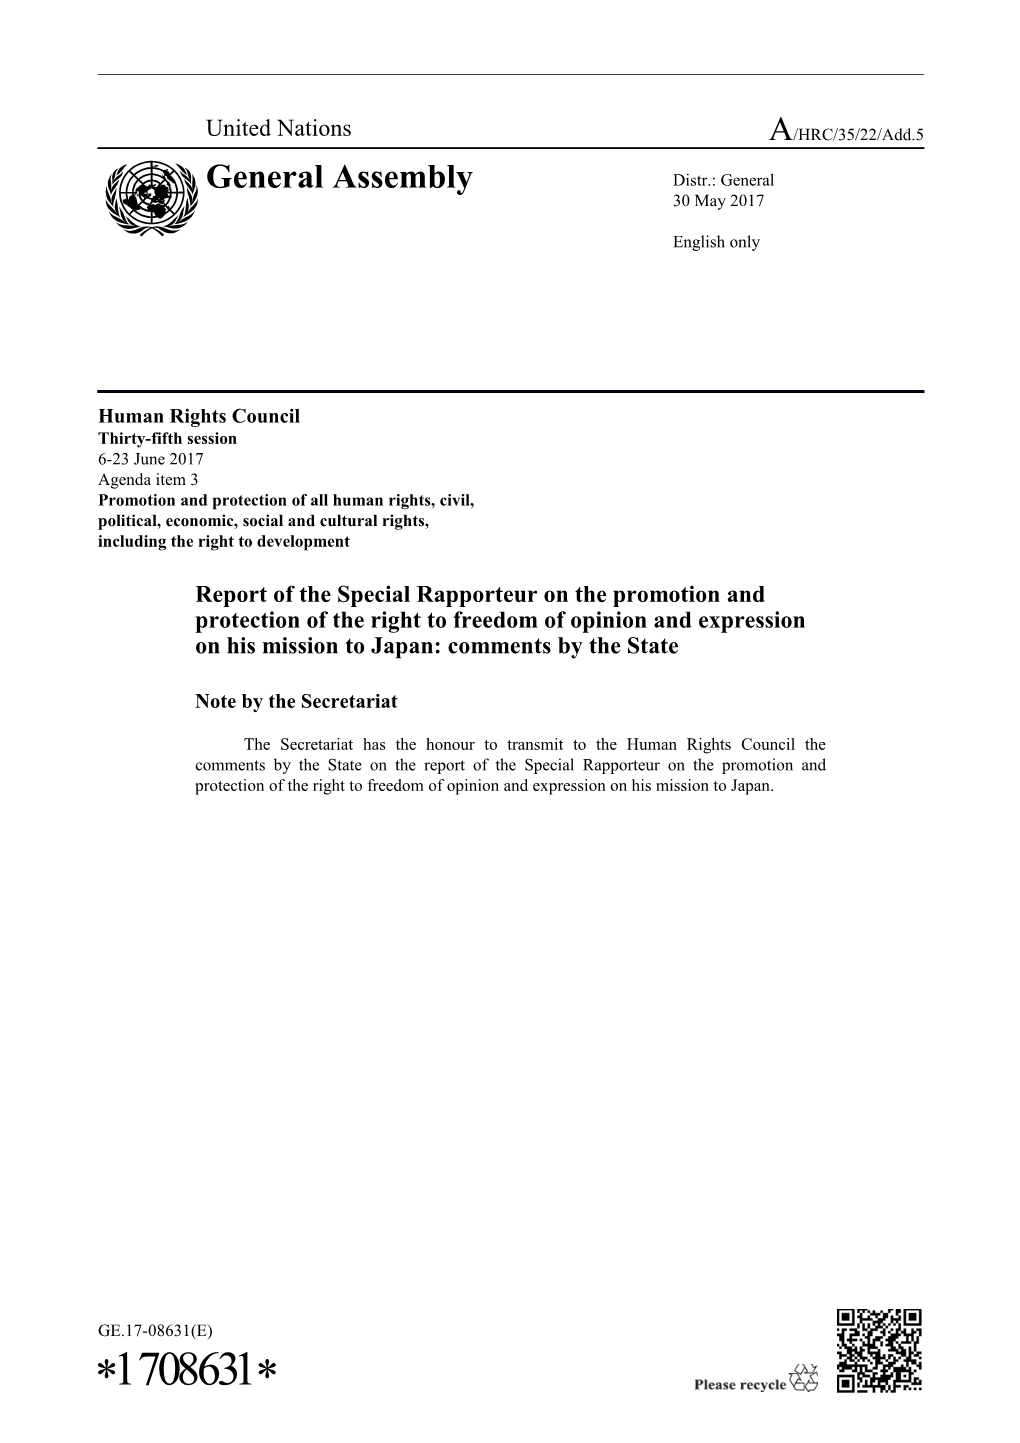 Addendum of Report of the Special Rapporteur on the Promotion and Protection of the Right